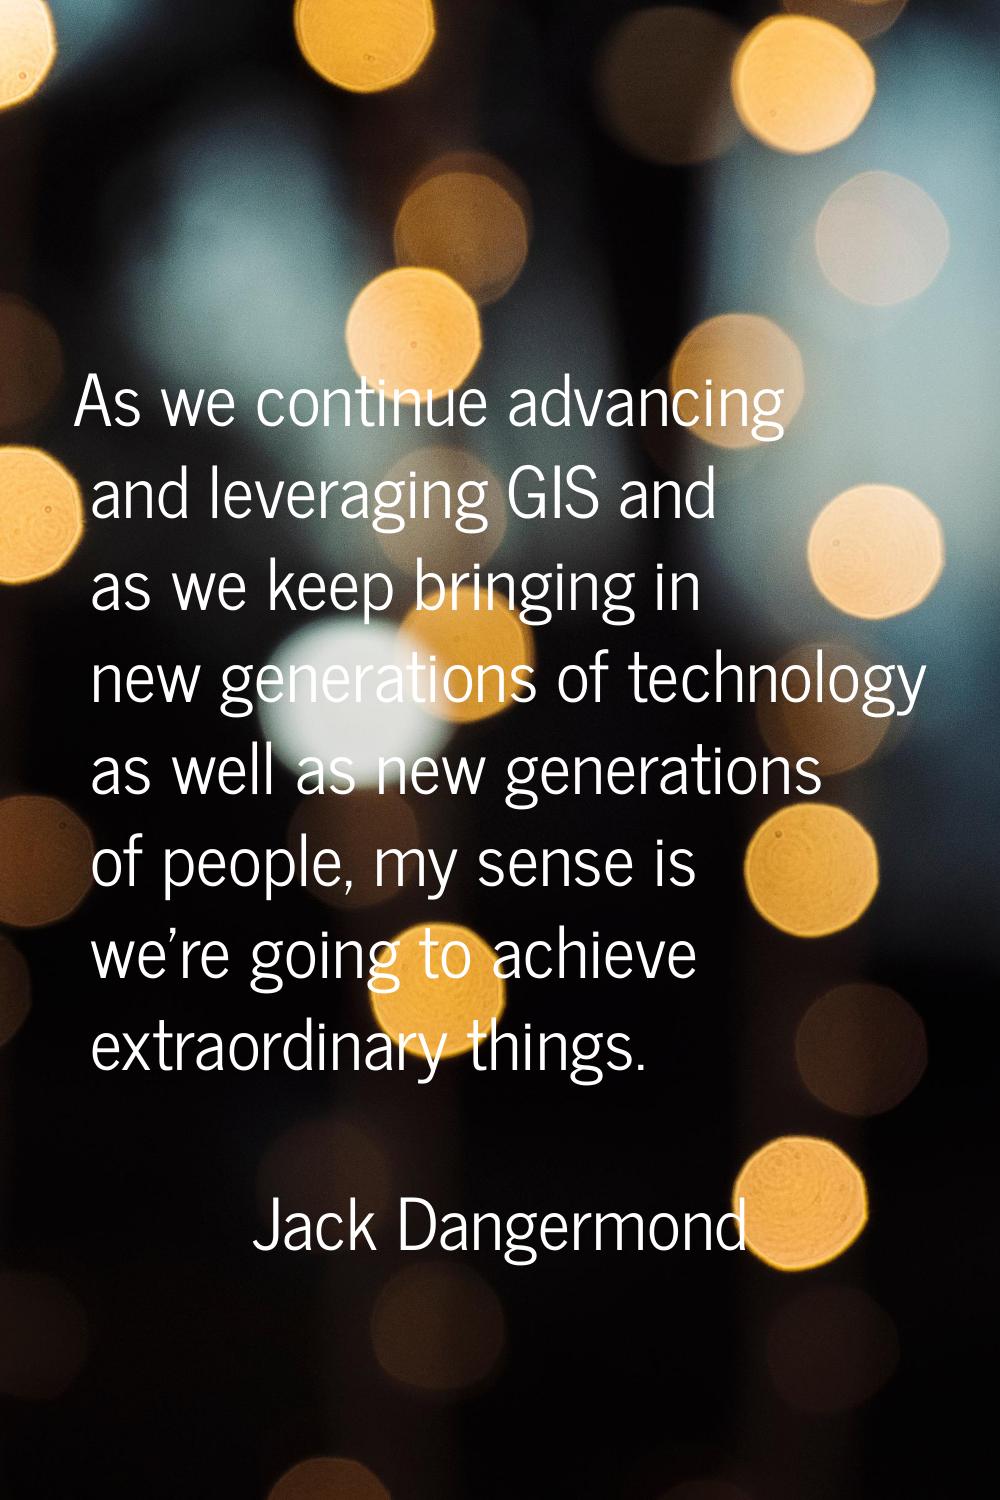 As we continue advancing and leveraging GIS and as we keep bringing in new generations of technolog